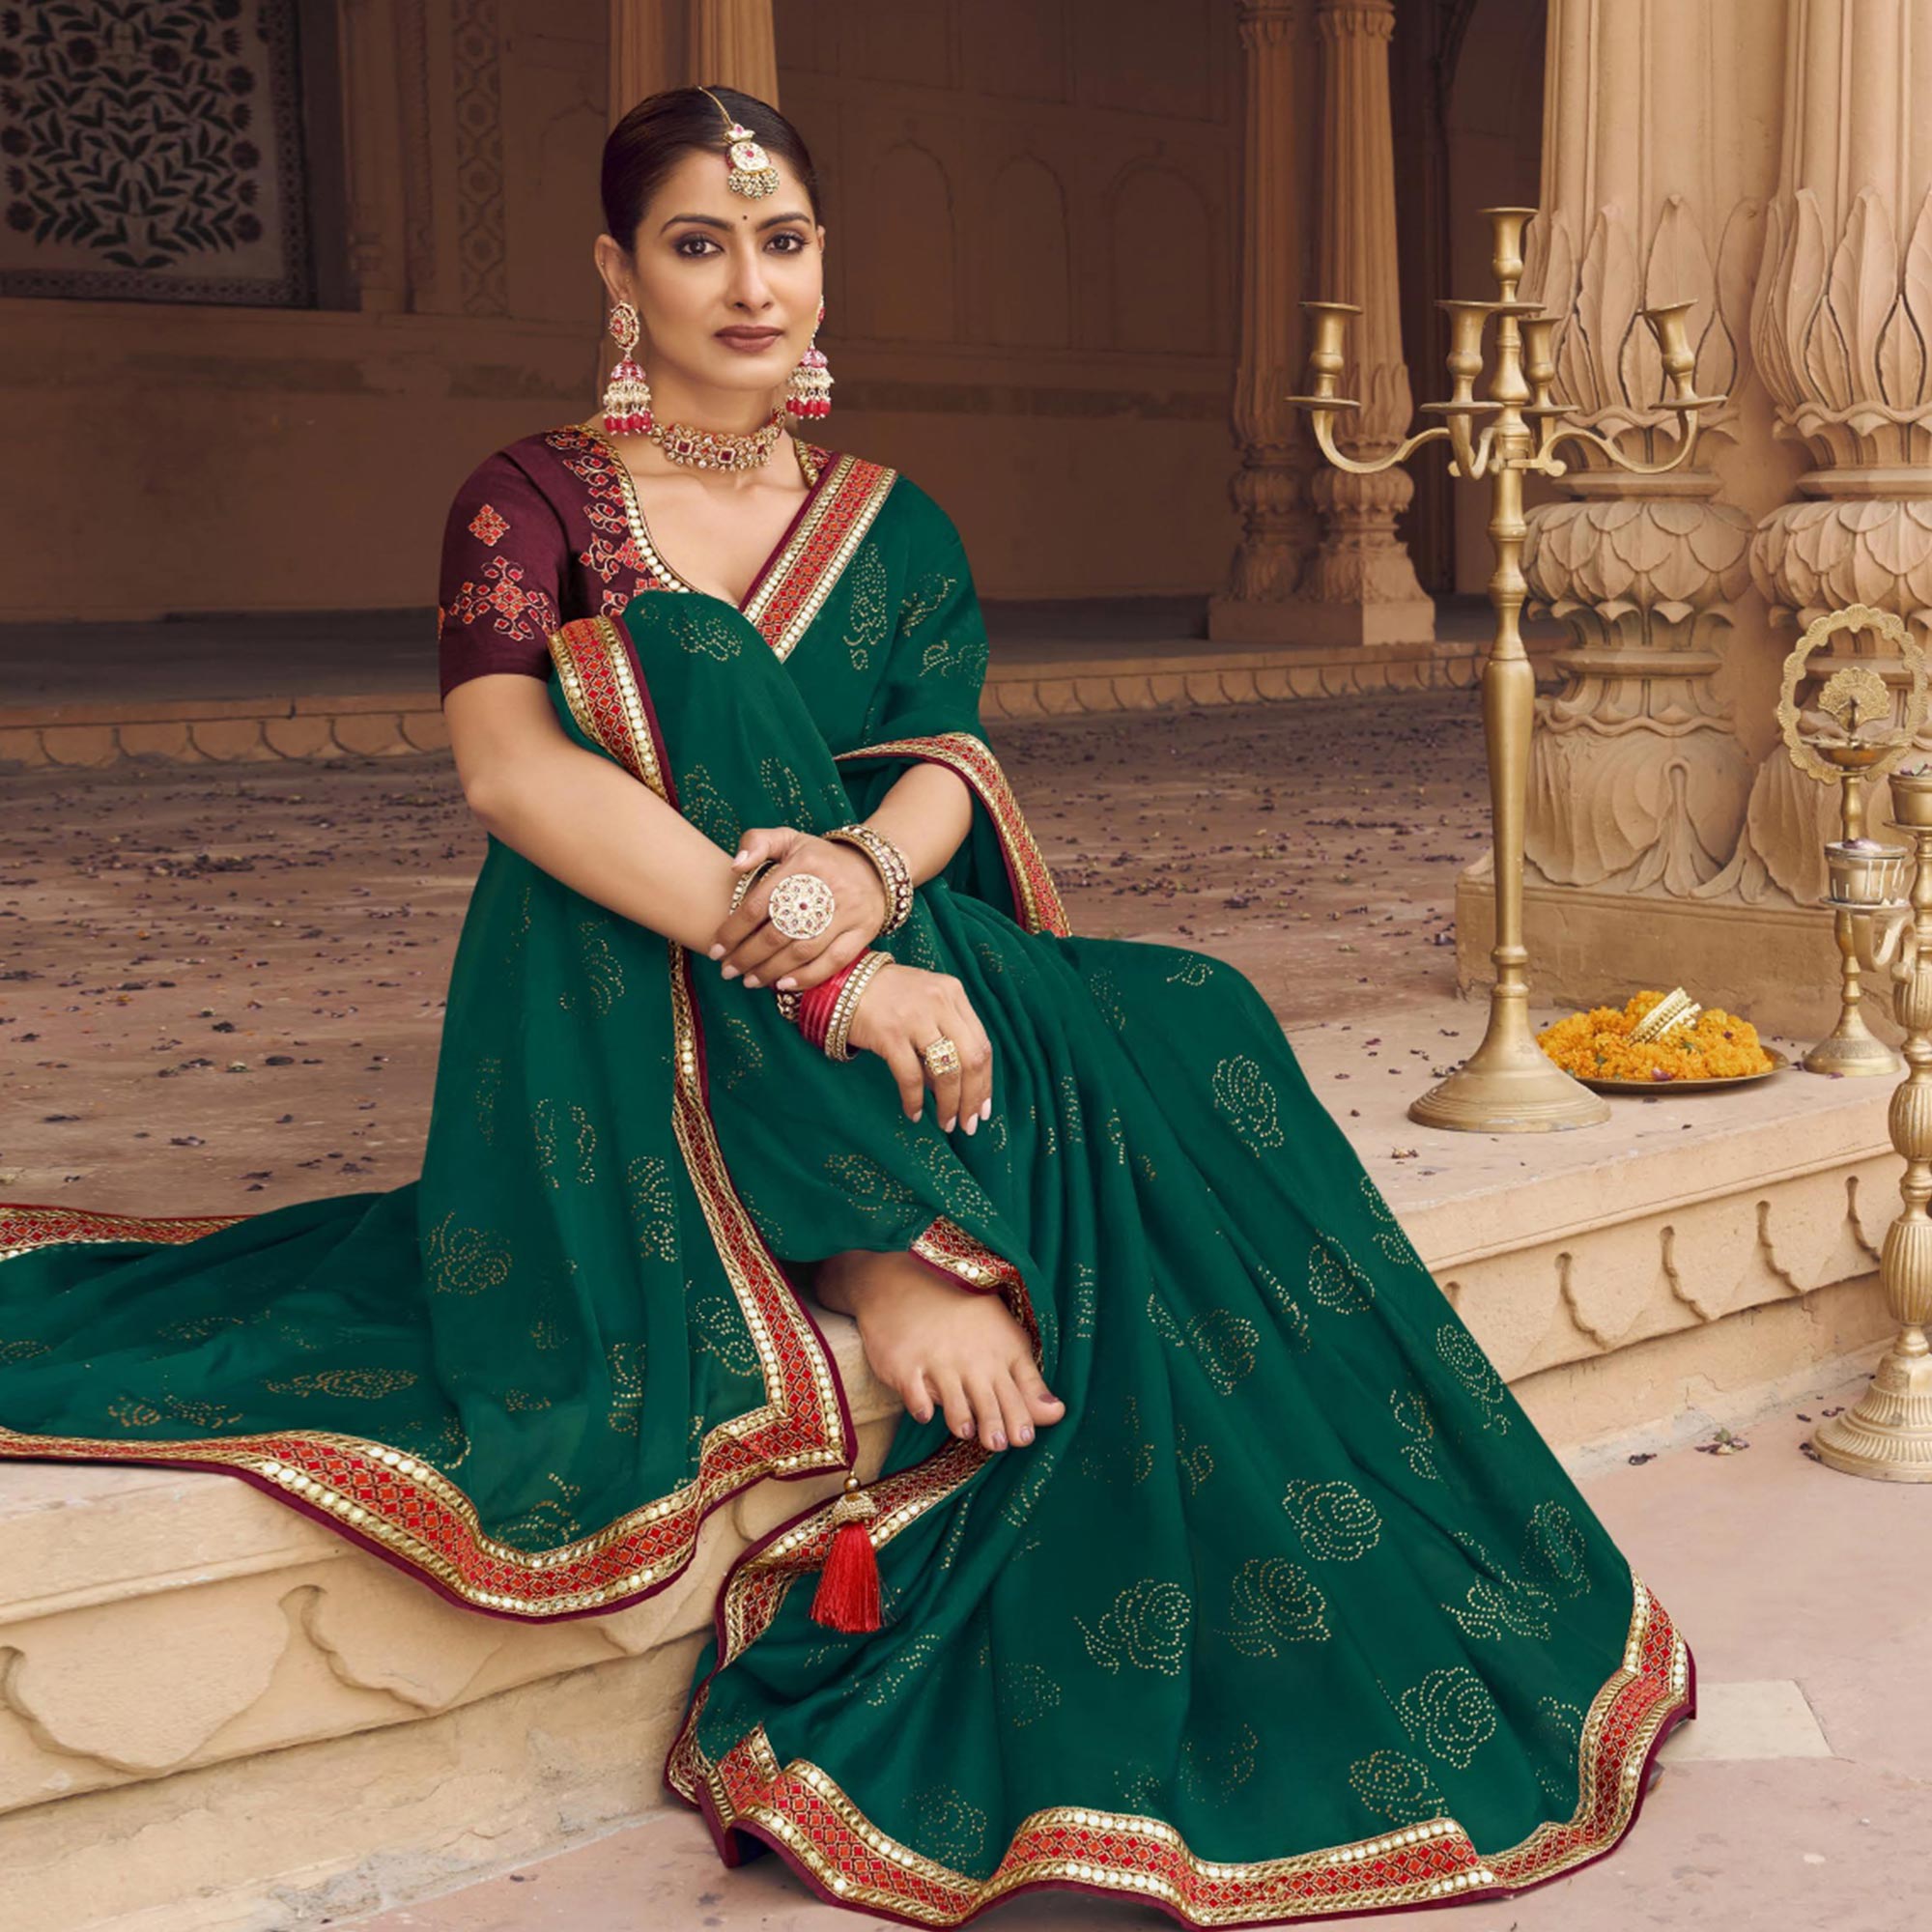 Green Embellished With Embroidered Border Satin Saree